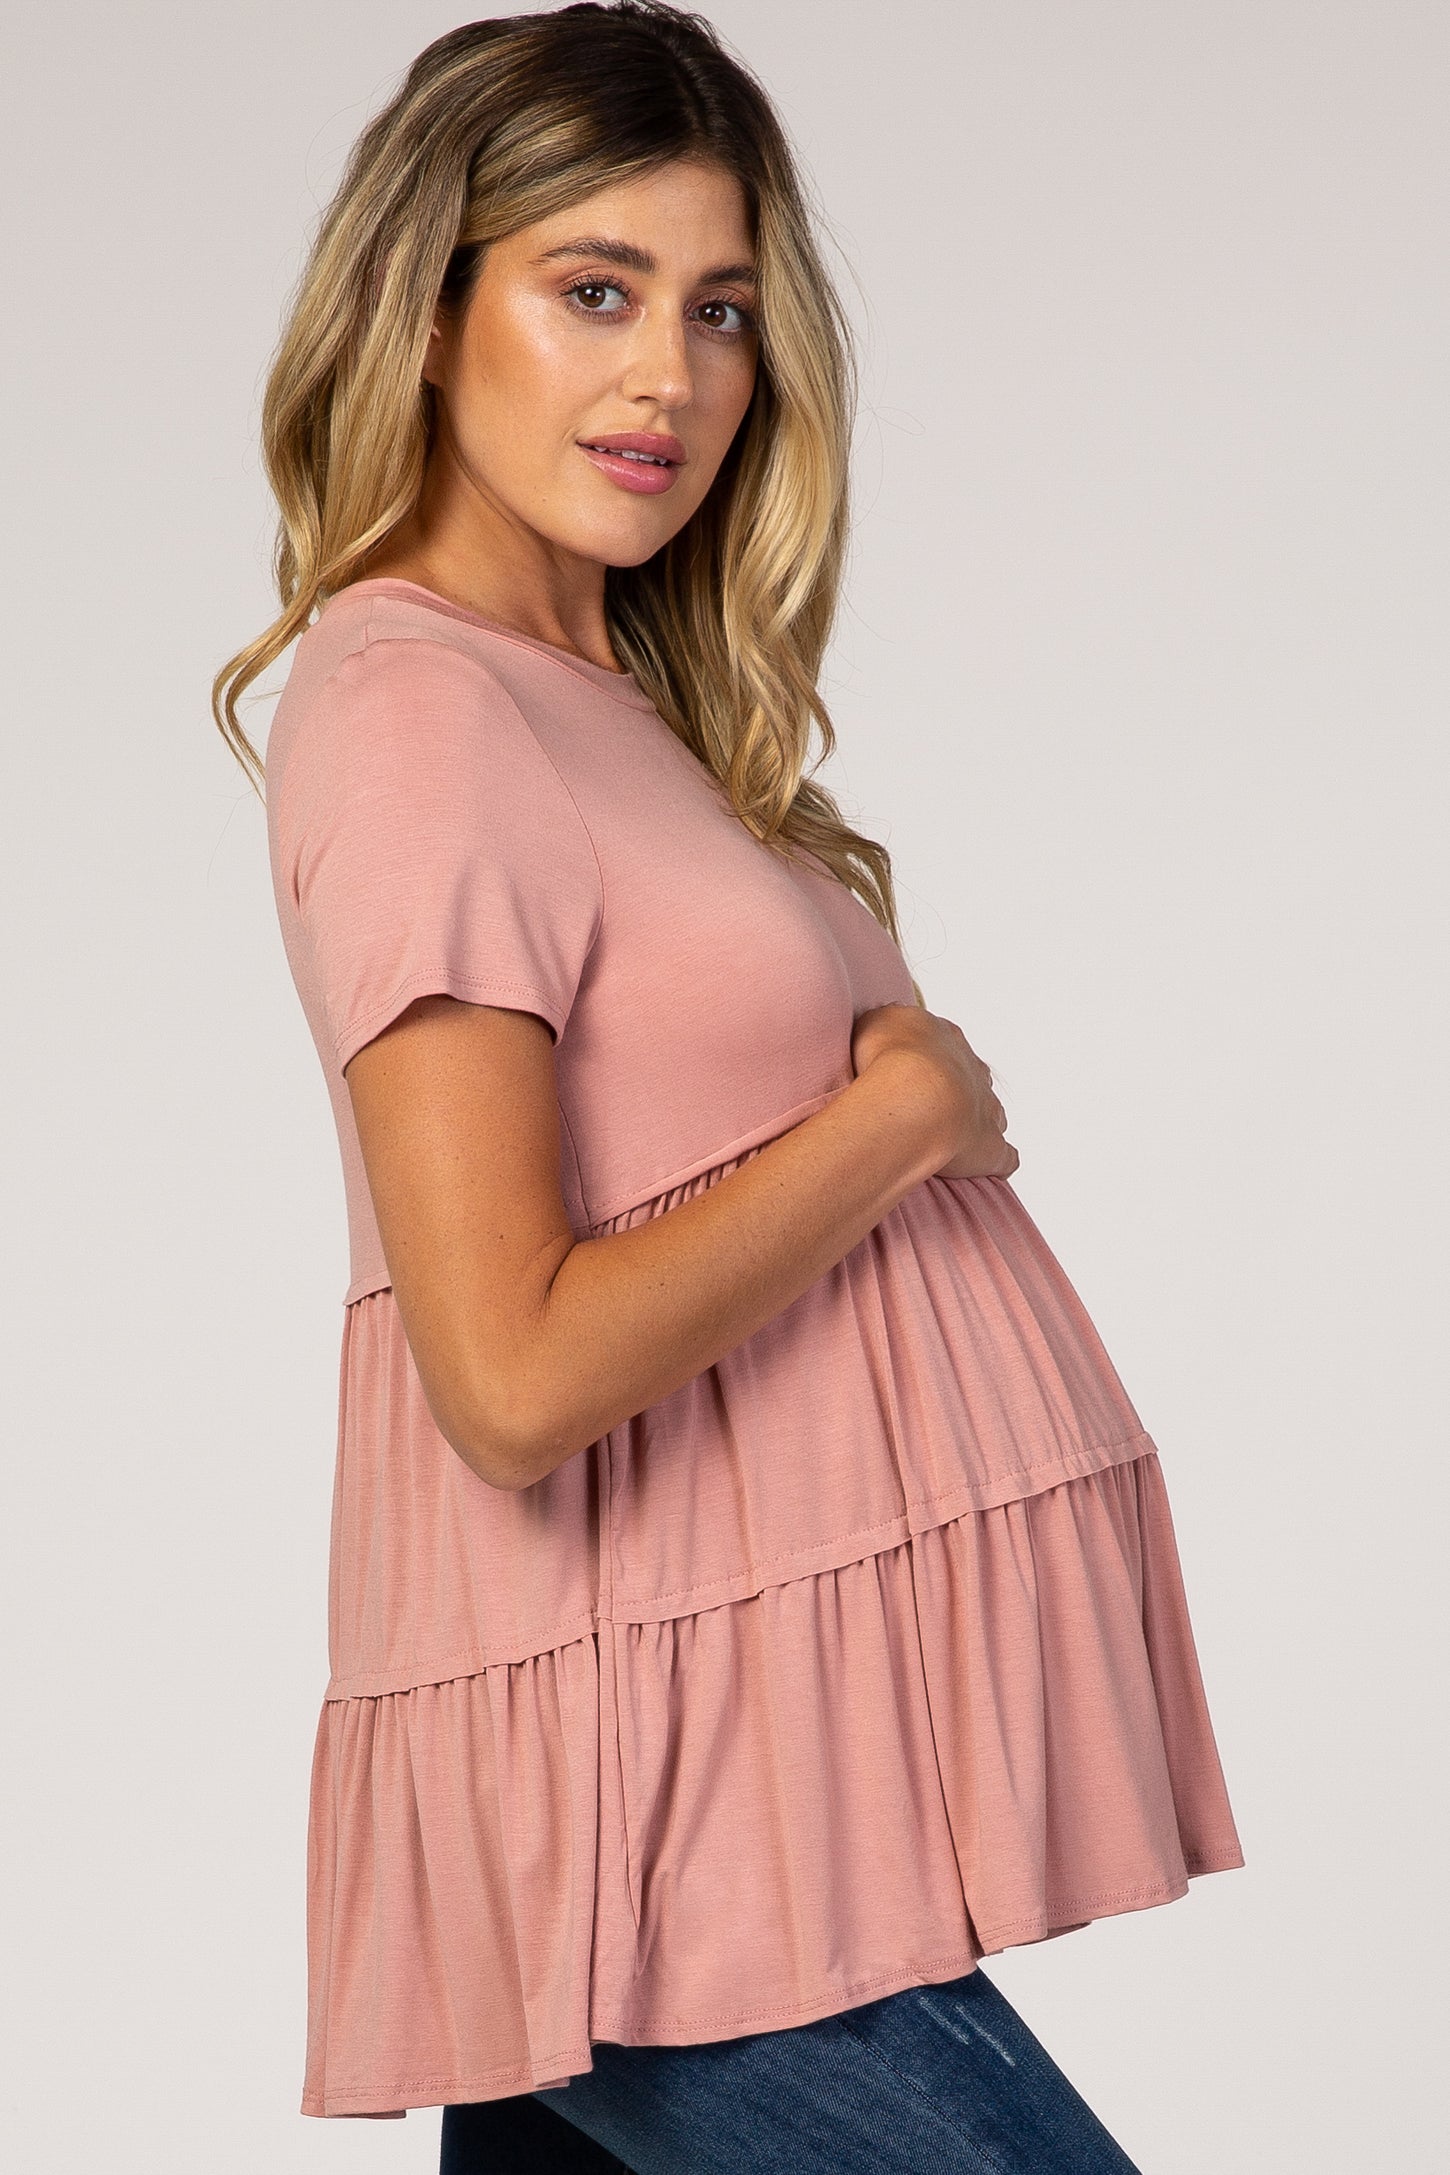 Pink Tiered Maternity Top